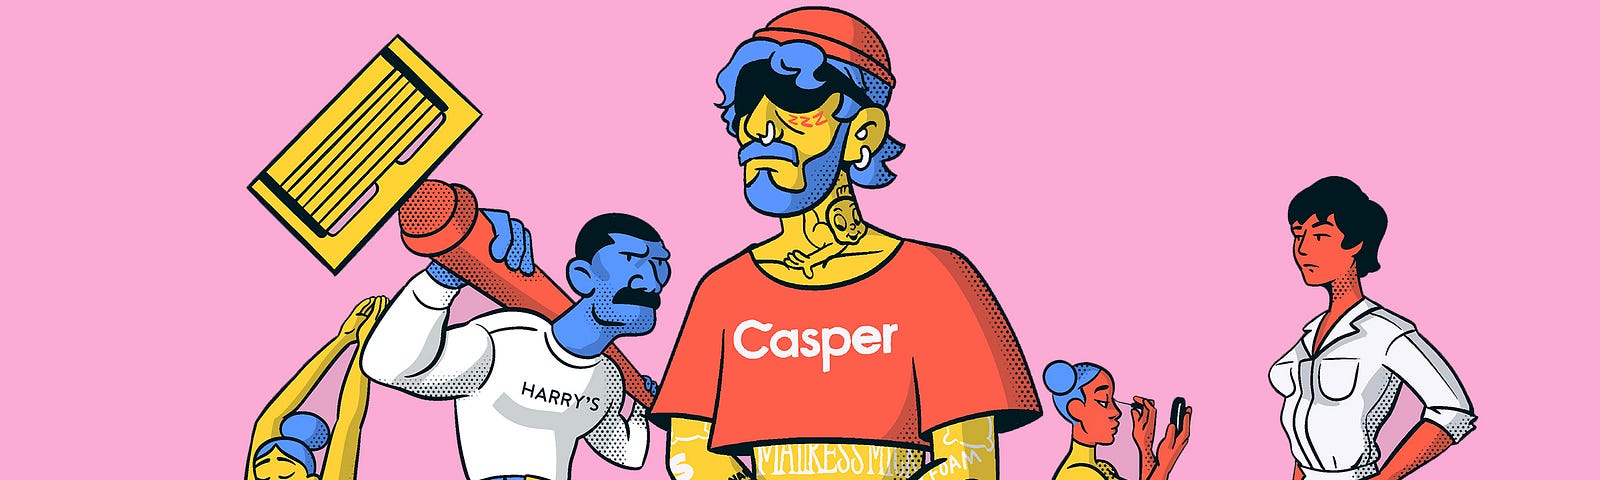 An illustration with different characters representing direct-to-consumer startups such as Casper, Harry’s, Away, Brandless.